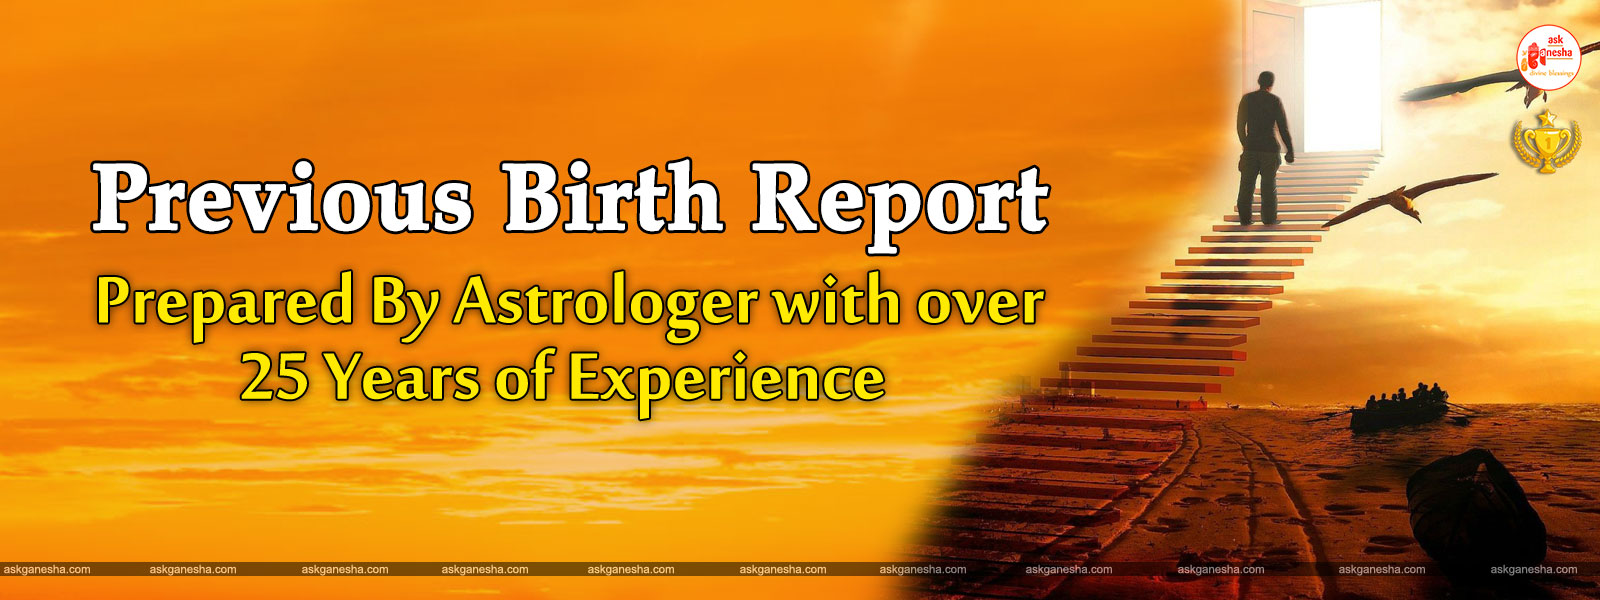 Previous Birth Astrology Report